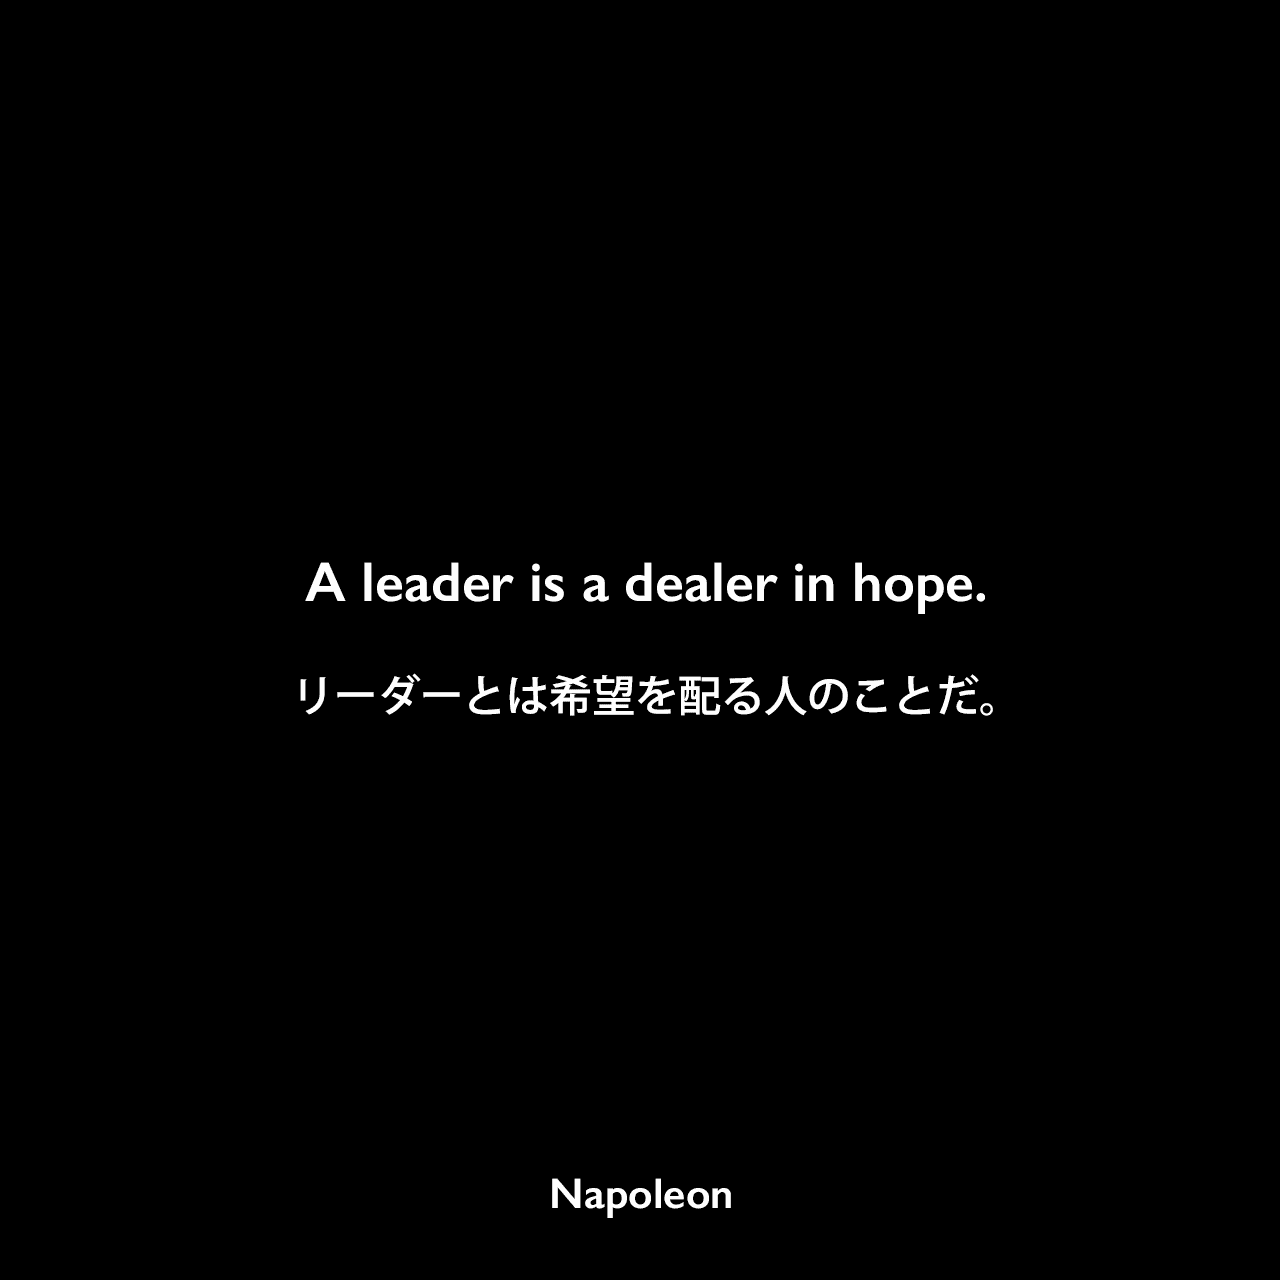 A leader is a dealer in hope.リーダーとは希望を配る人のことだ。- 「Napoleon in his own words」よりNapoleon